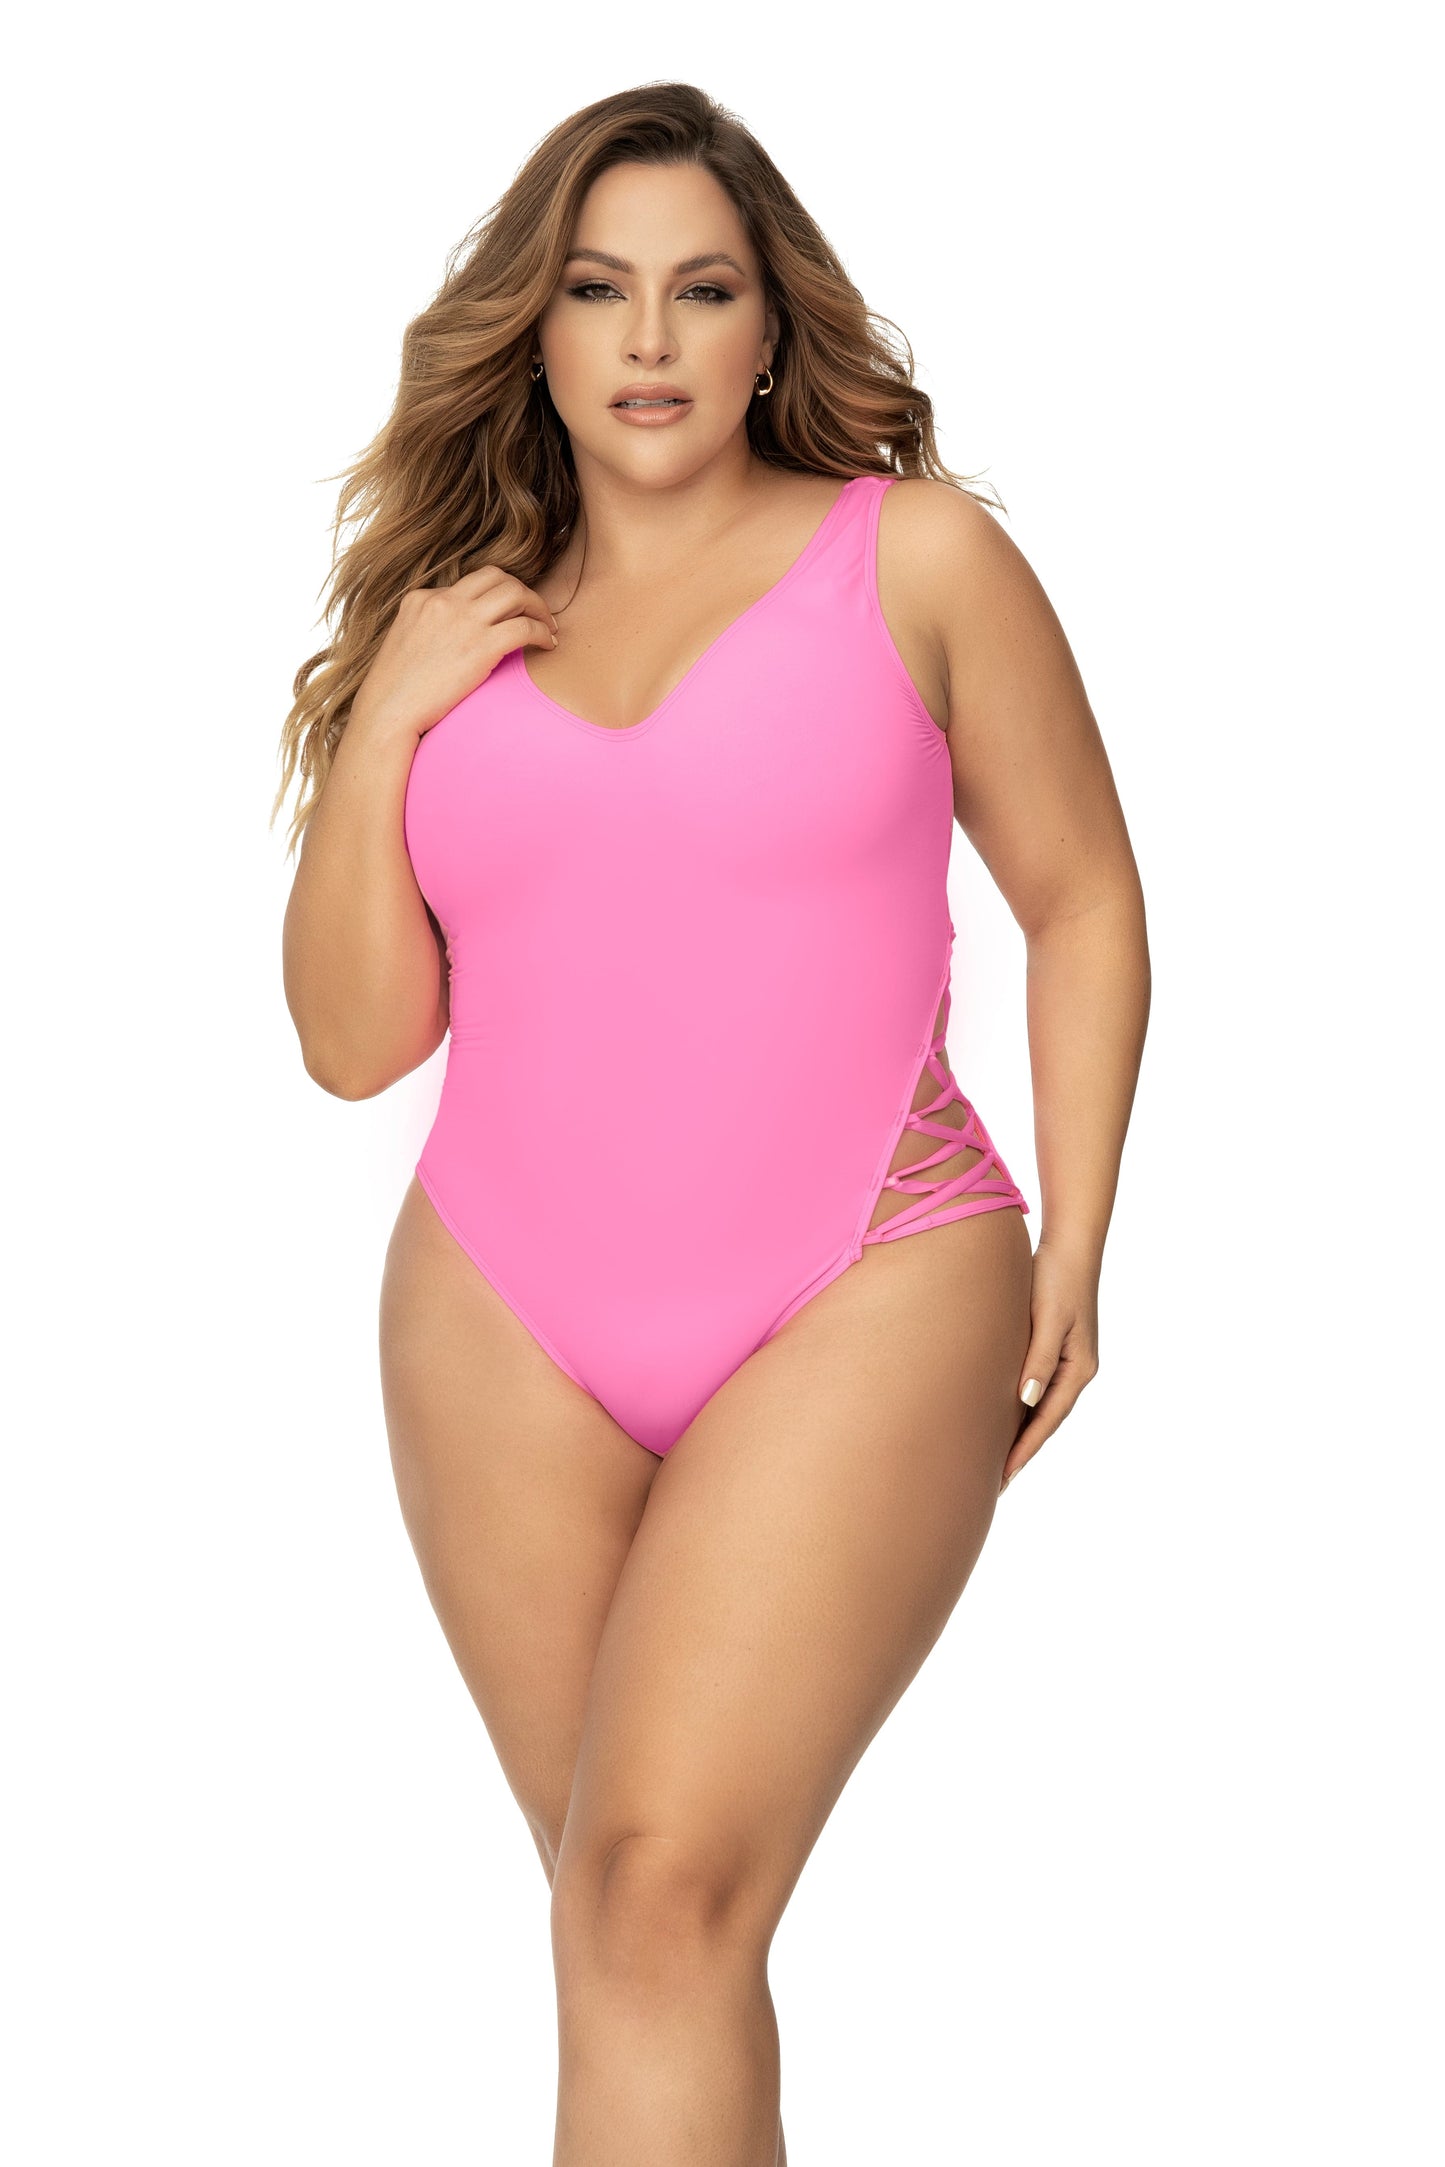 https://sohotswimwear.com/cdn/shop/files/mapale-apparel-accessories-clothing-swimwear-pink-1-2x-plus-size-pink-lace-up-detail-medium-coverage-bottom-one-piece-swimsuit-2024-sexy-plus-size-pink-lace-up-detail-one-piece-swimsu_1445x.jpg?v=1708428512